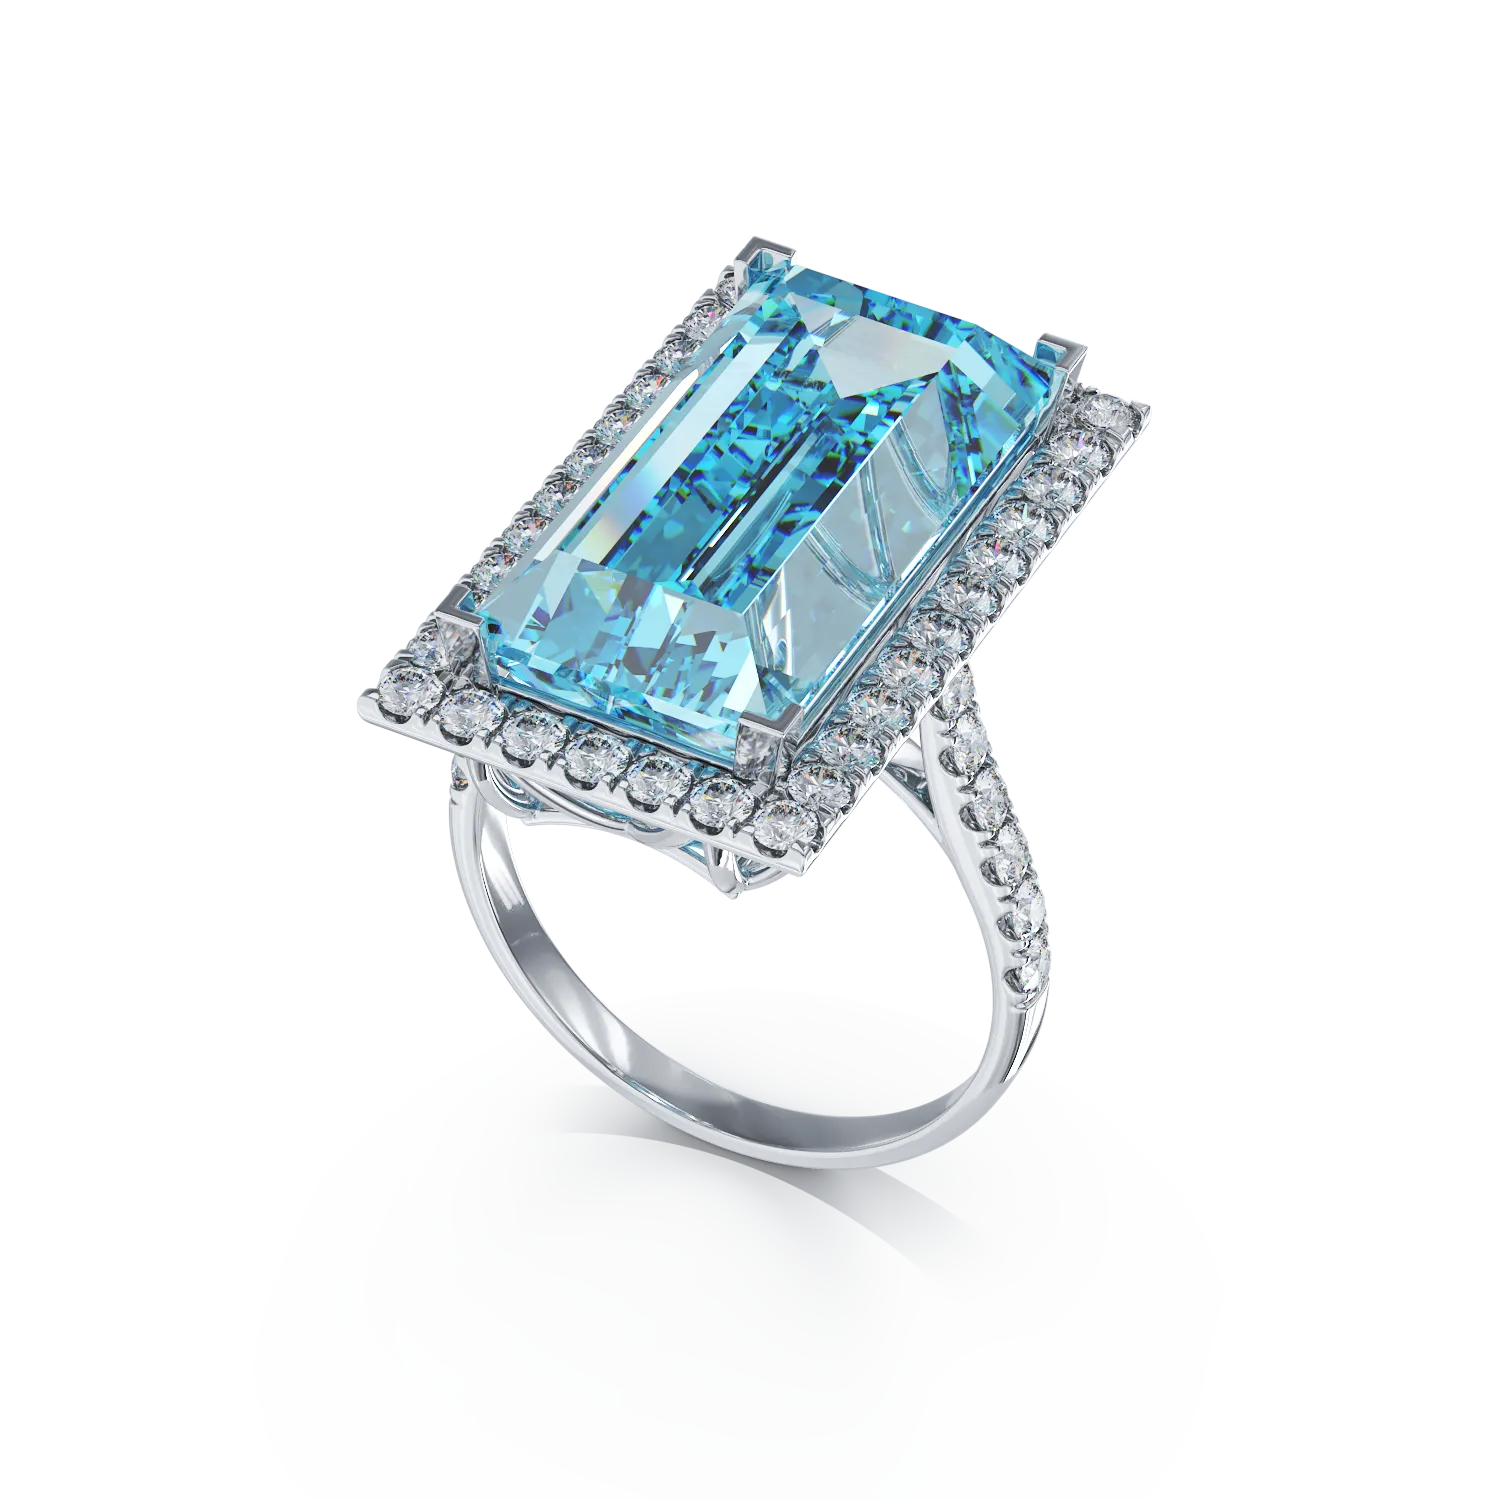 White gold ring with 17.31ct blue topaz and 1.35ct diamonds